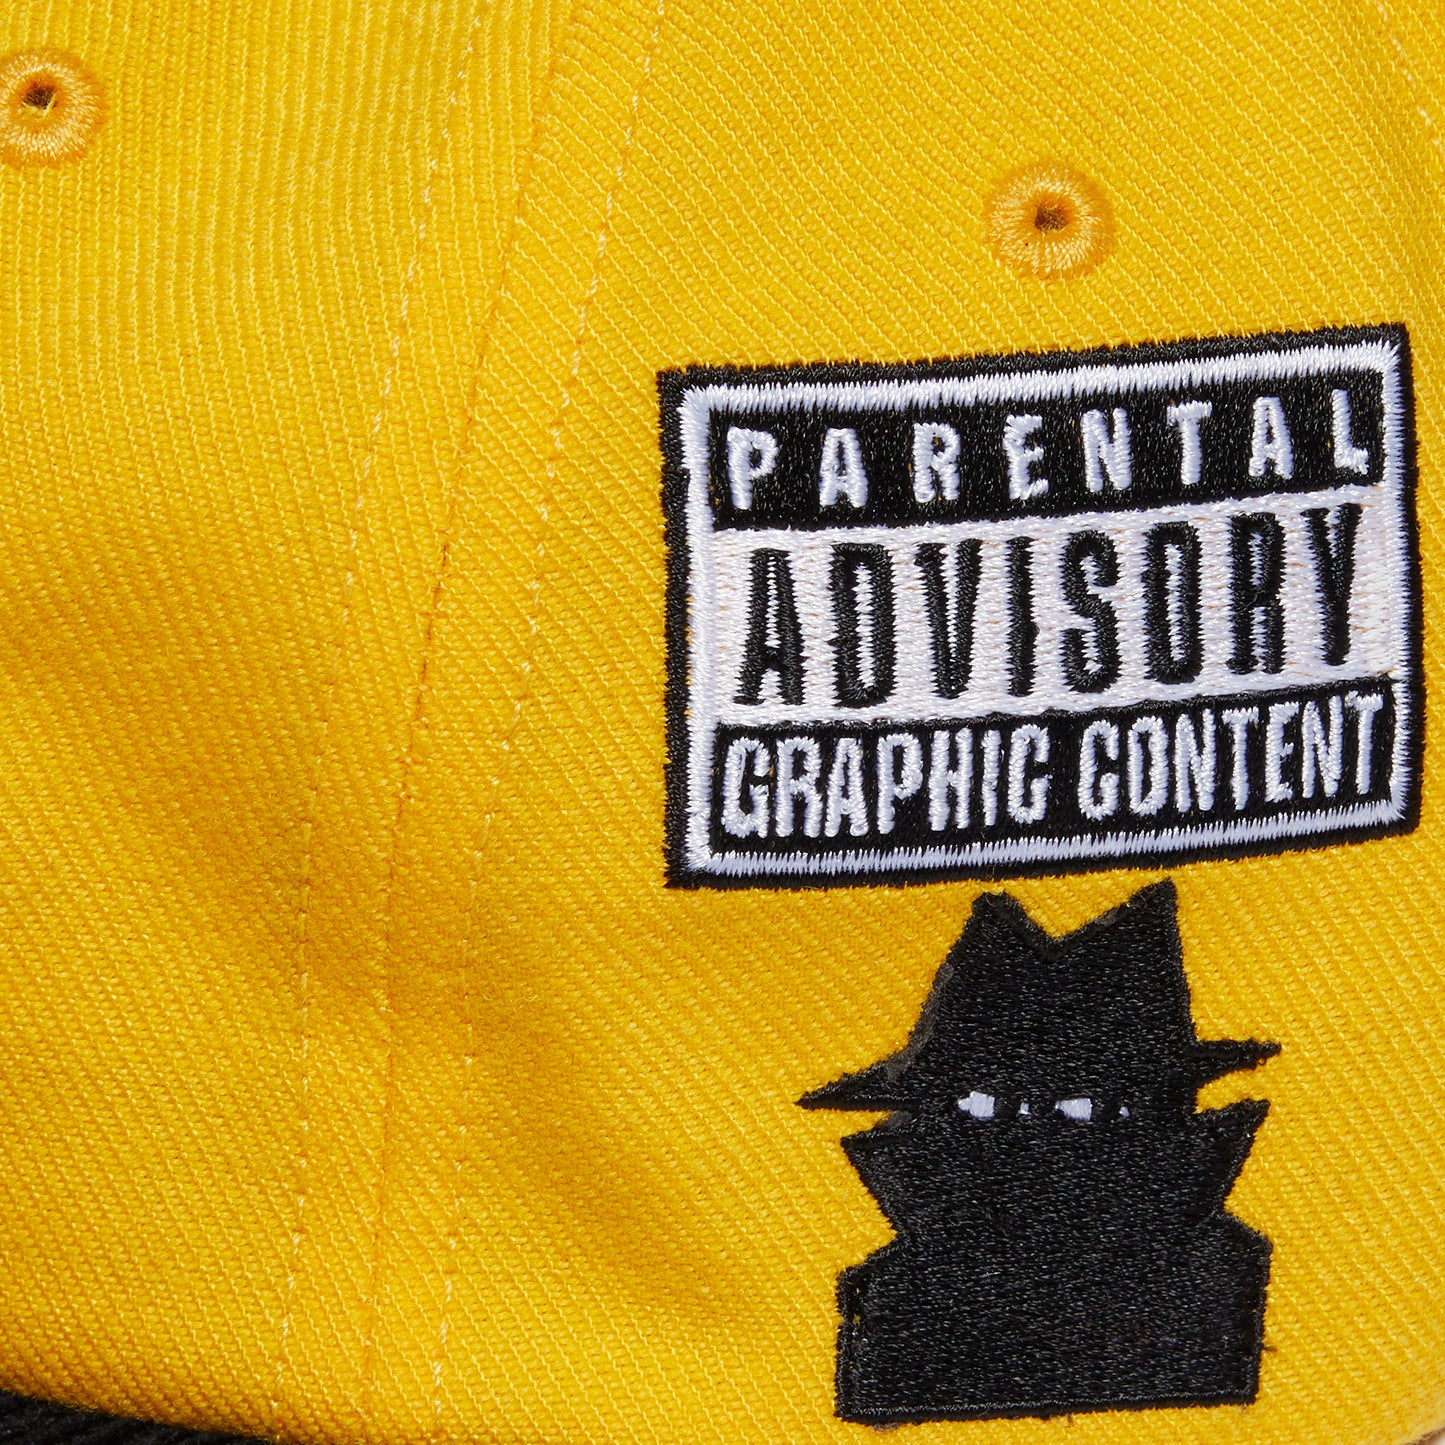 Real Bad Man Records & Tapes Hat (Yellow)